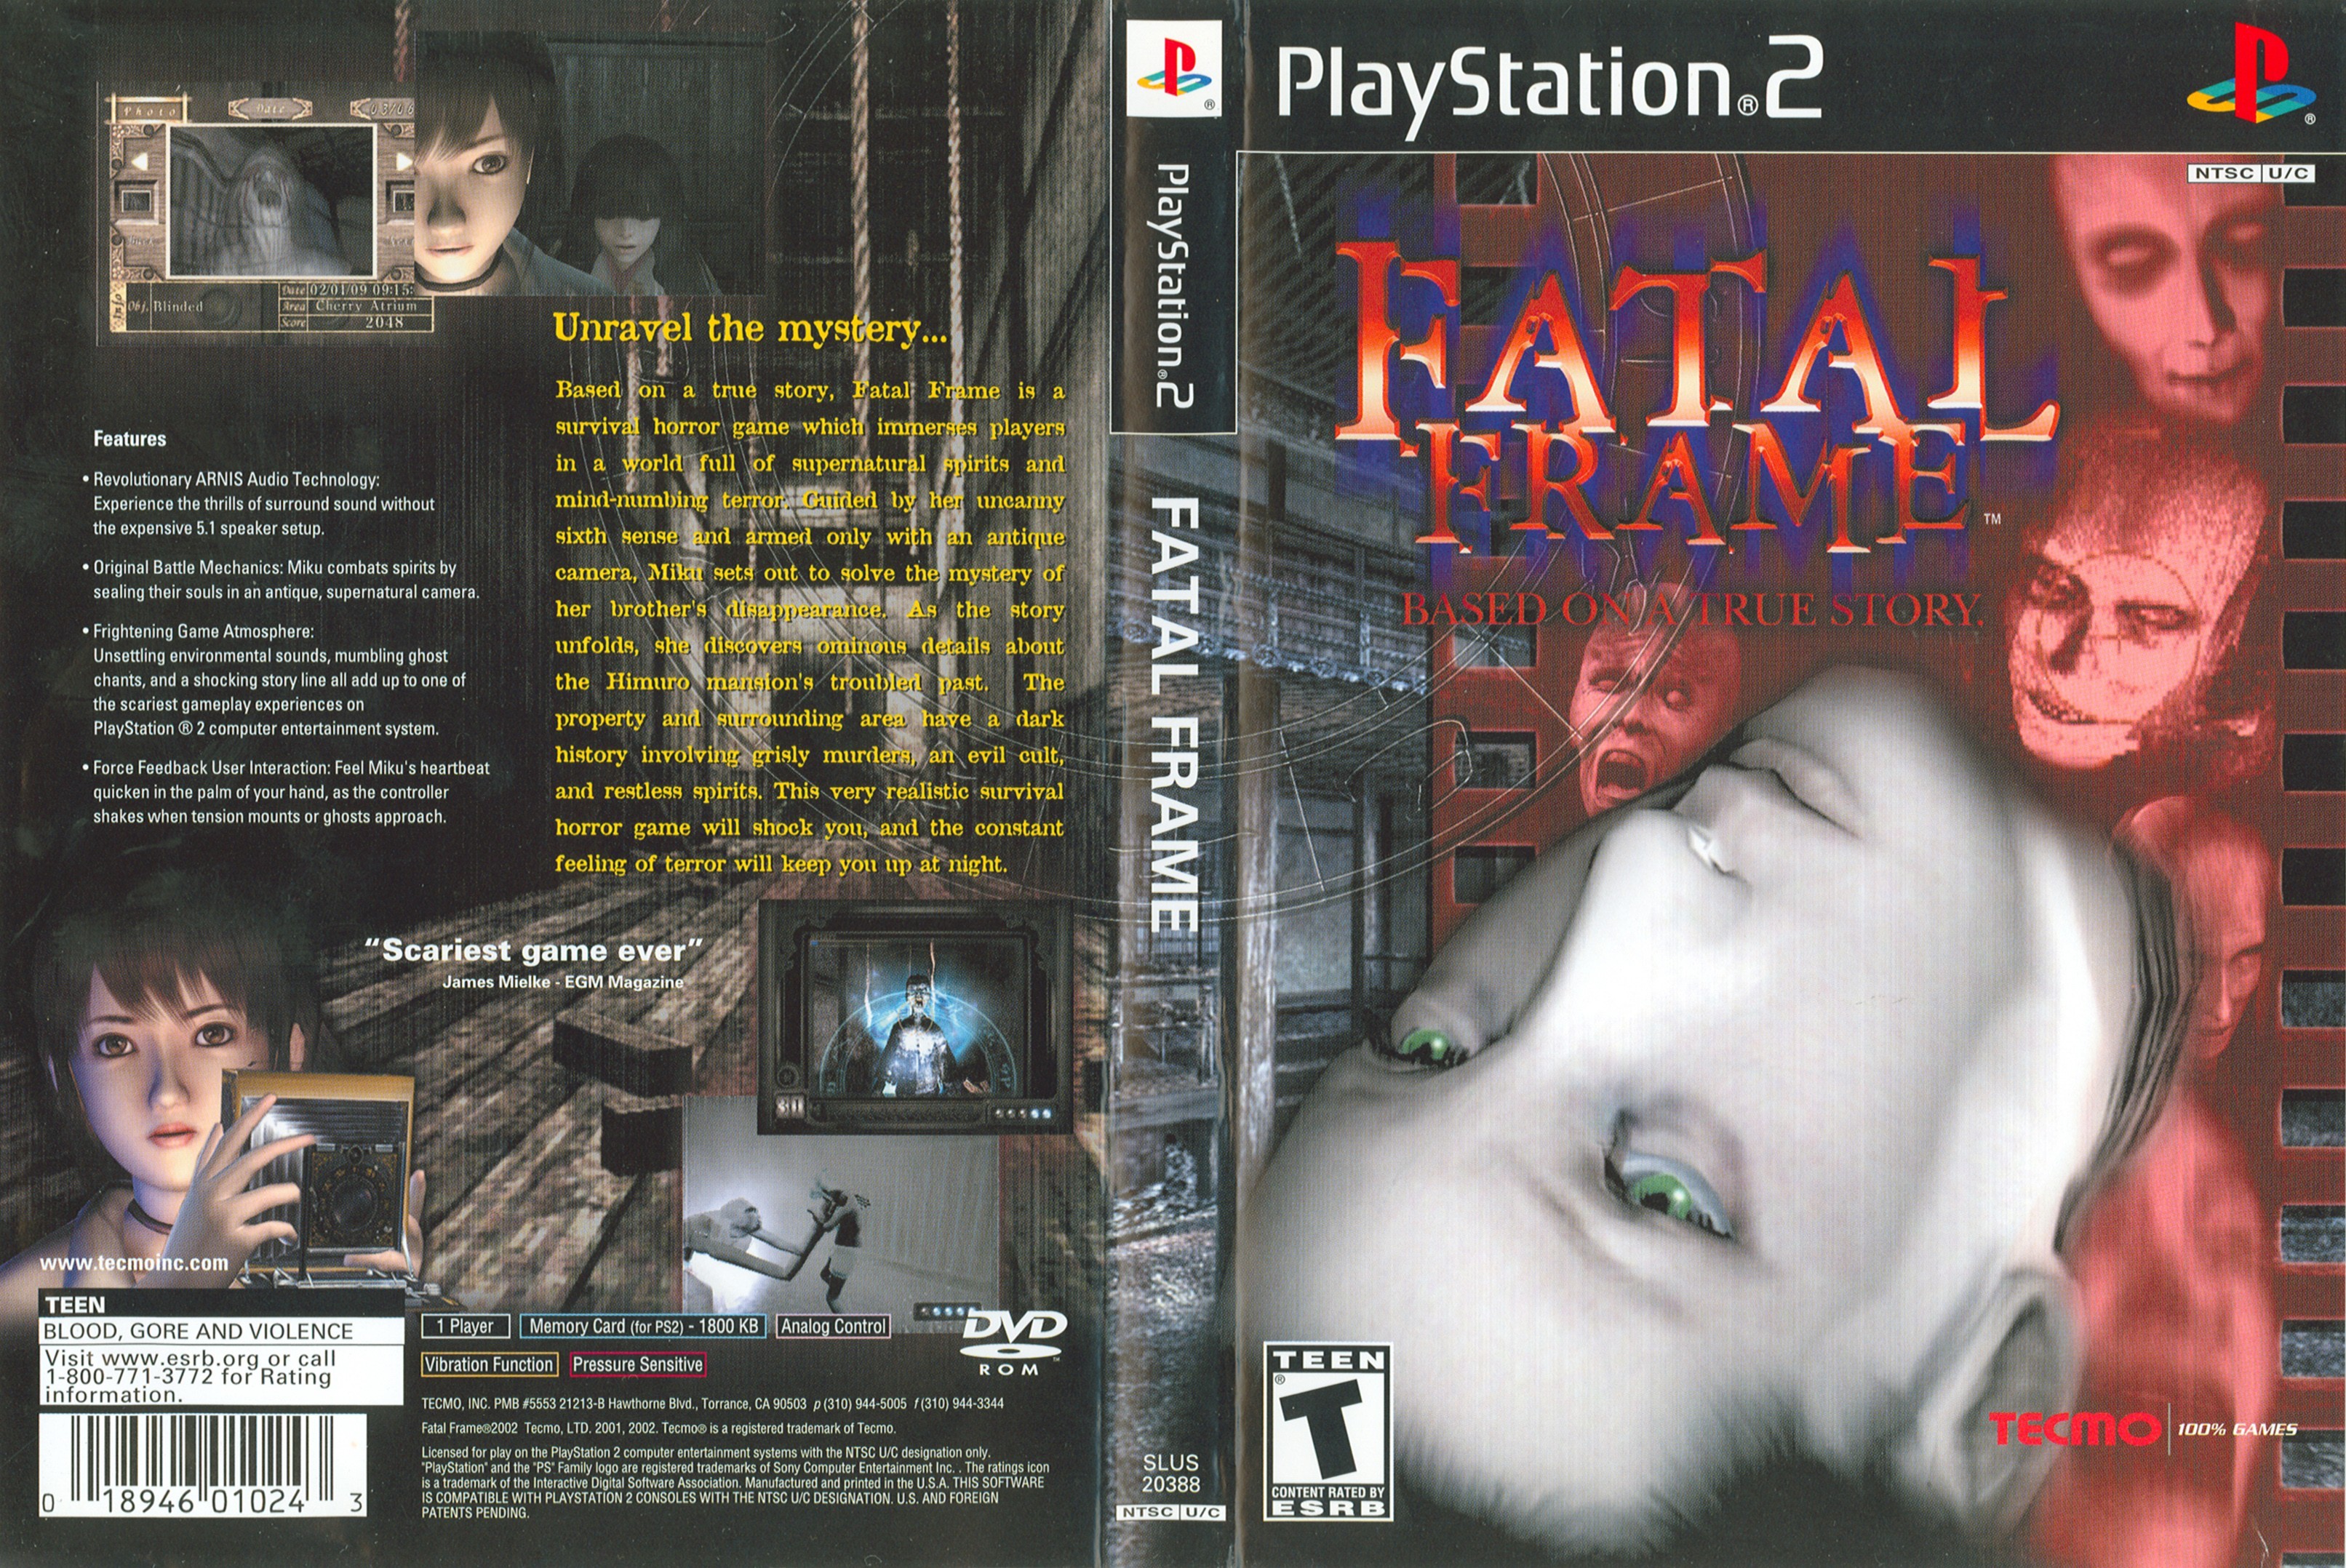 download fatal frame maiden of black water pc download for free